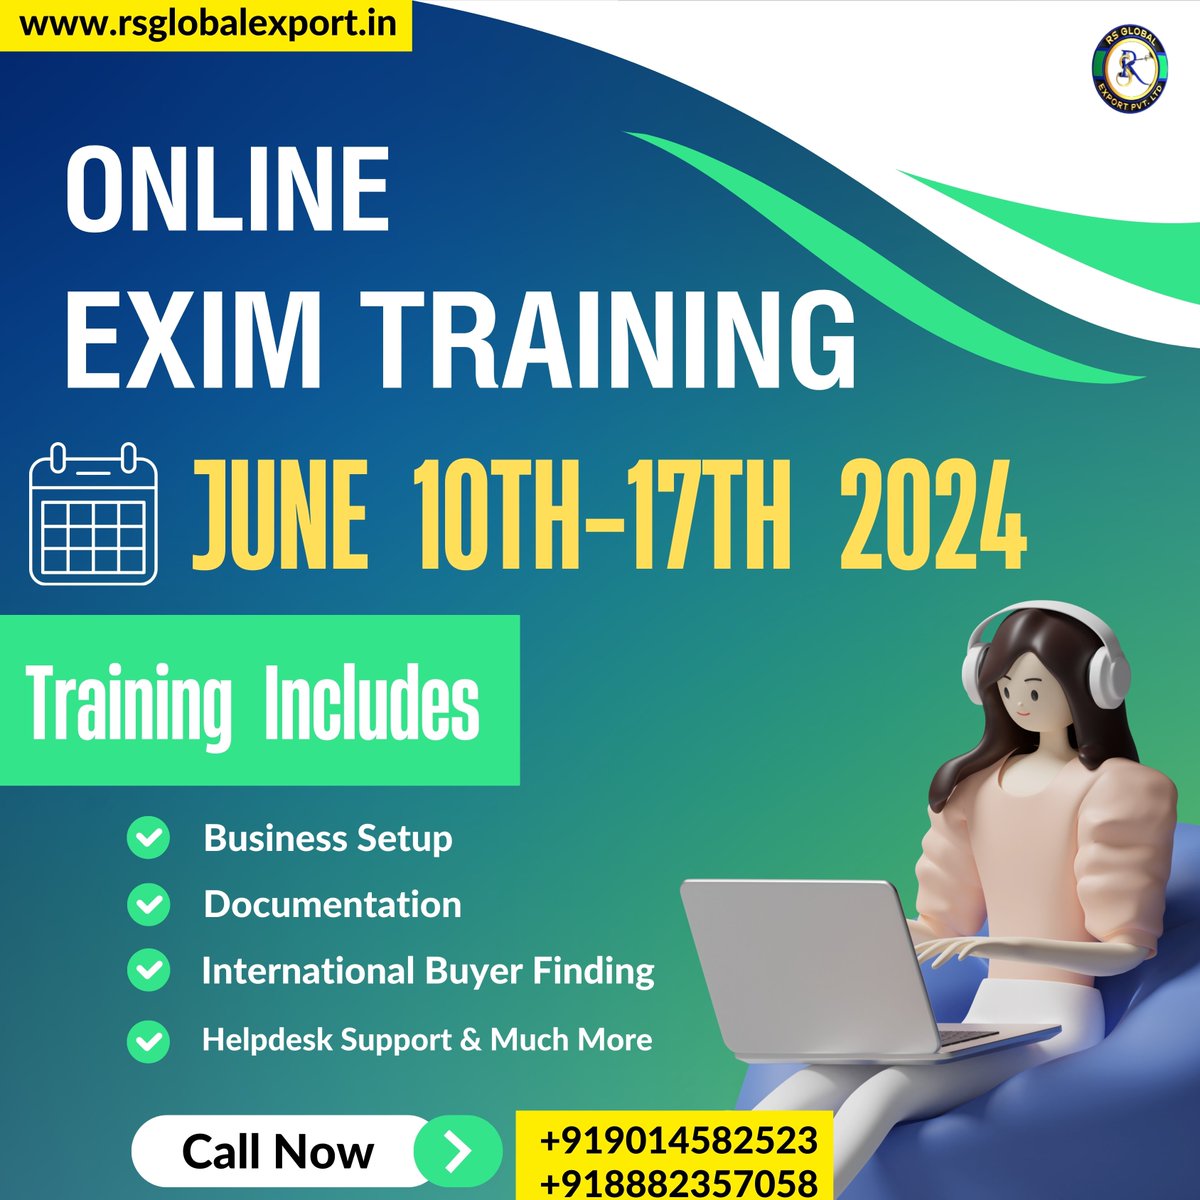 🚀 Join us for an unparalleled opportunity in our dedicated online Exim practical training from June 10th-17th, 2024! 🌟 
.
.
.
.
.
.
.
.

💪 #EximTraining #GlobalTrade #CareerGrowth #OnlineLearning #EmpowerYourself #rsglobalexport #rajeevsaini #trade #exim #importexportbusiness